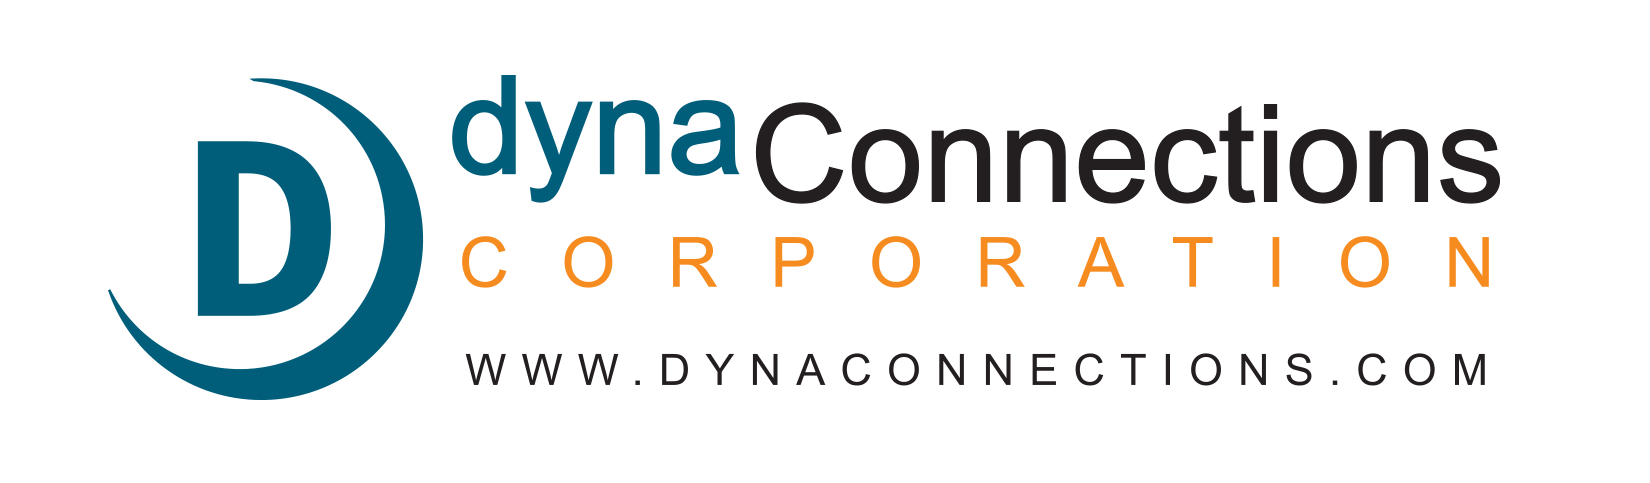 dynaConnections logo